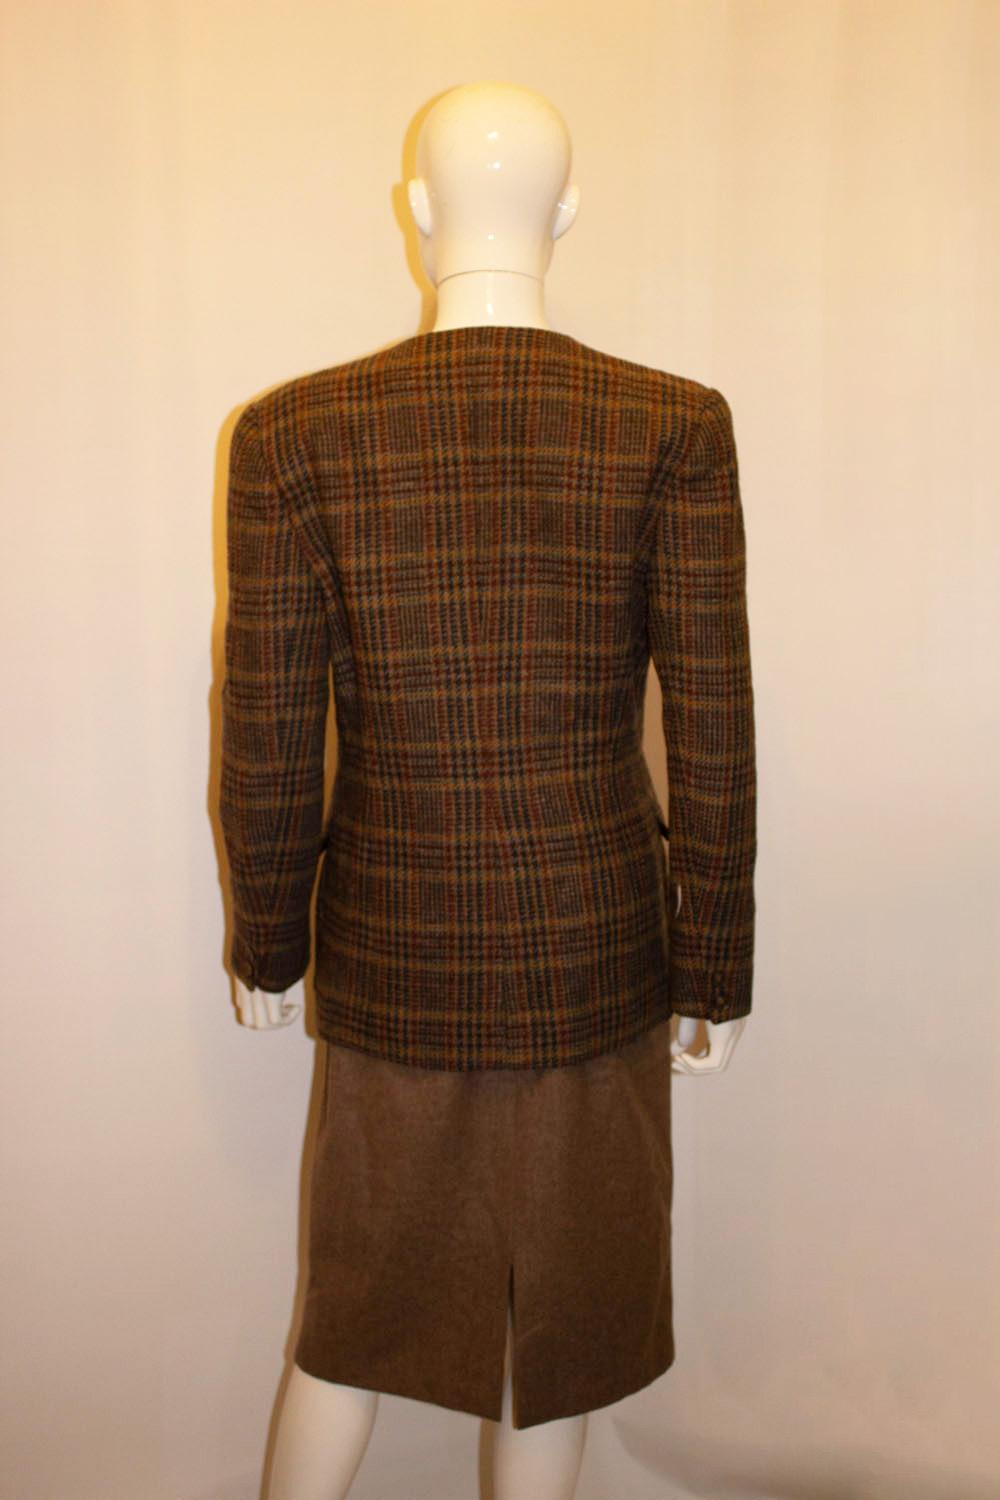 A wonderful vintage skirt suit by Liberty of London, the fabric as you would expect is of superb quality.
The jacket has a v shaped neckline with two button front opening and attractive detail on the pockets. The brown wool skirt has great belt